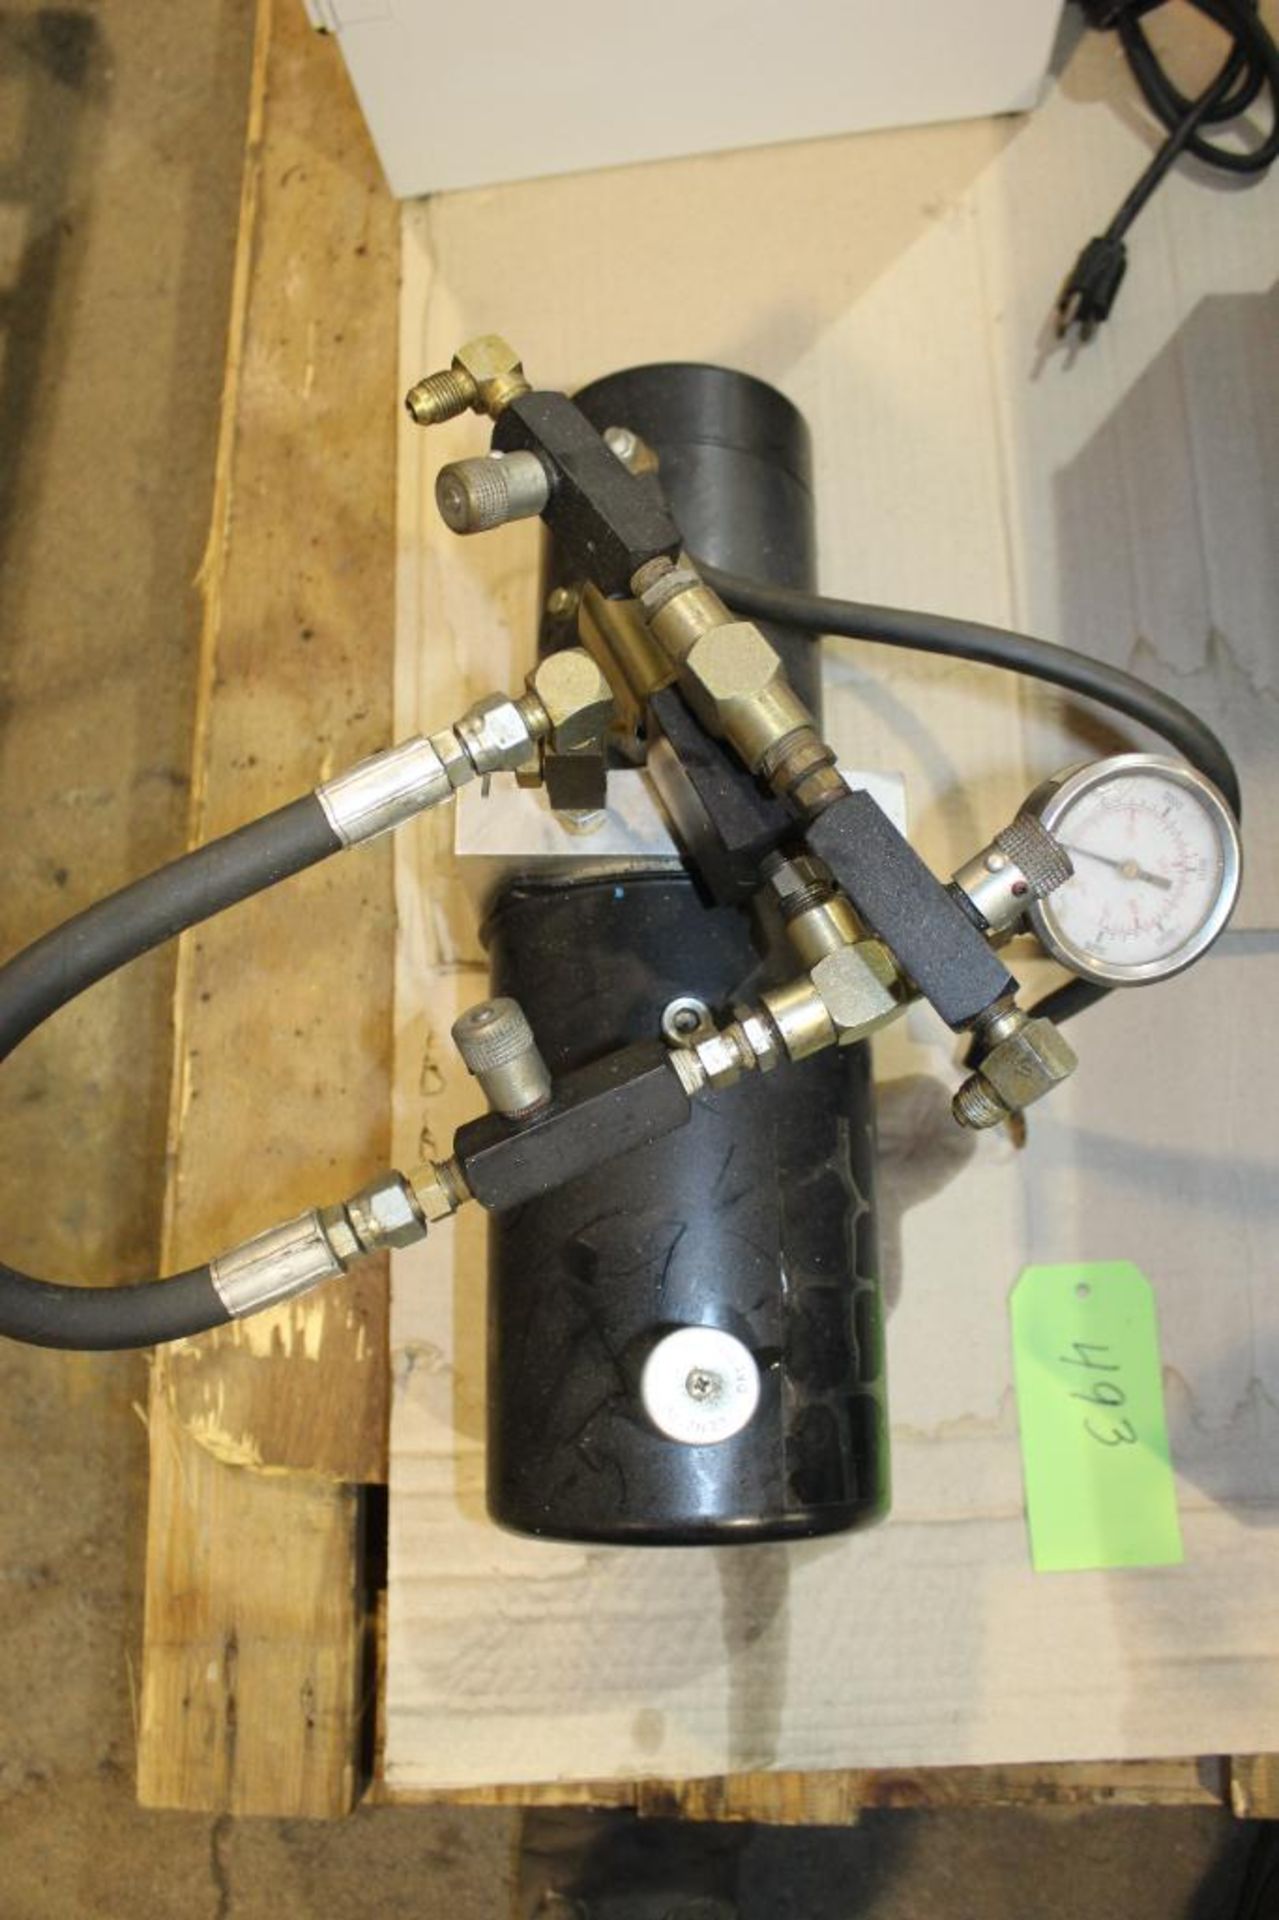 12V Delta Power Hydraulic Pump with Controls - Image 4 of 4